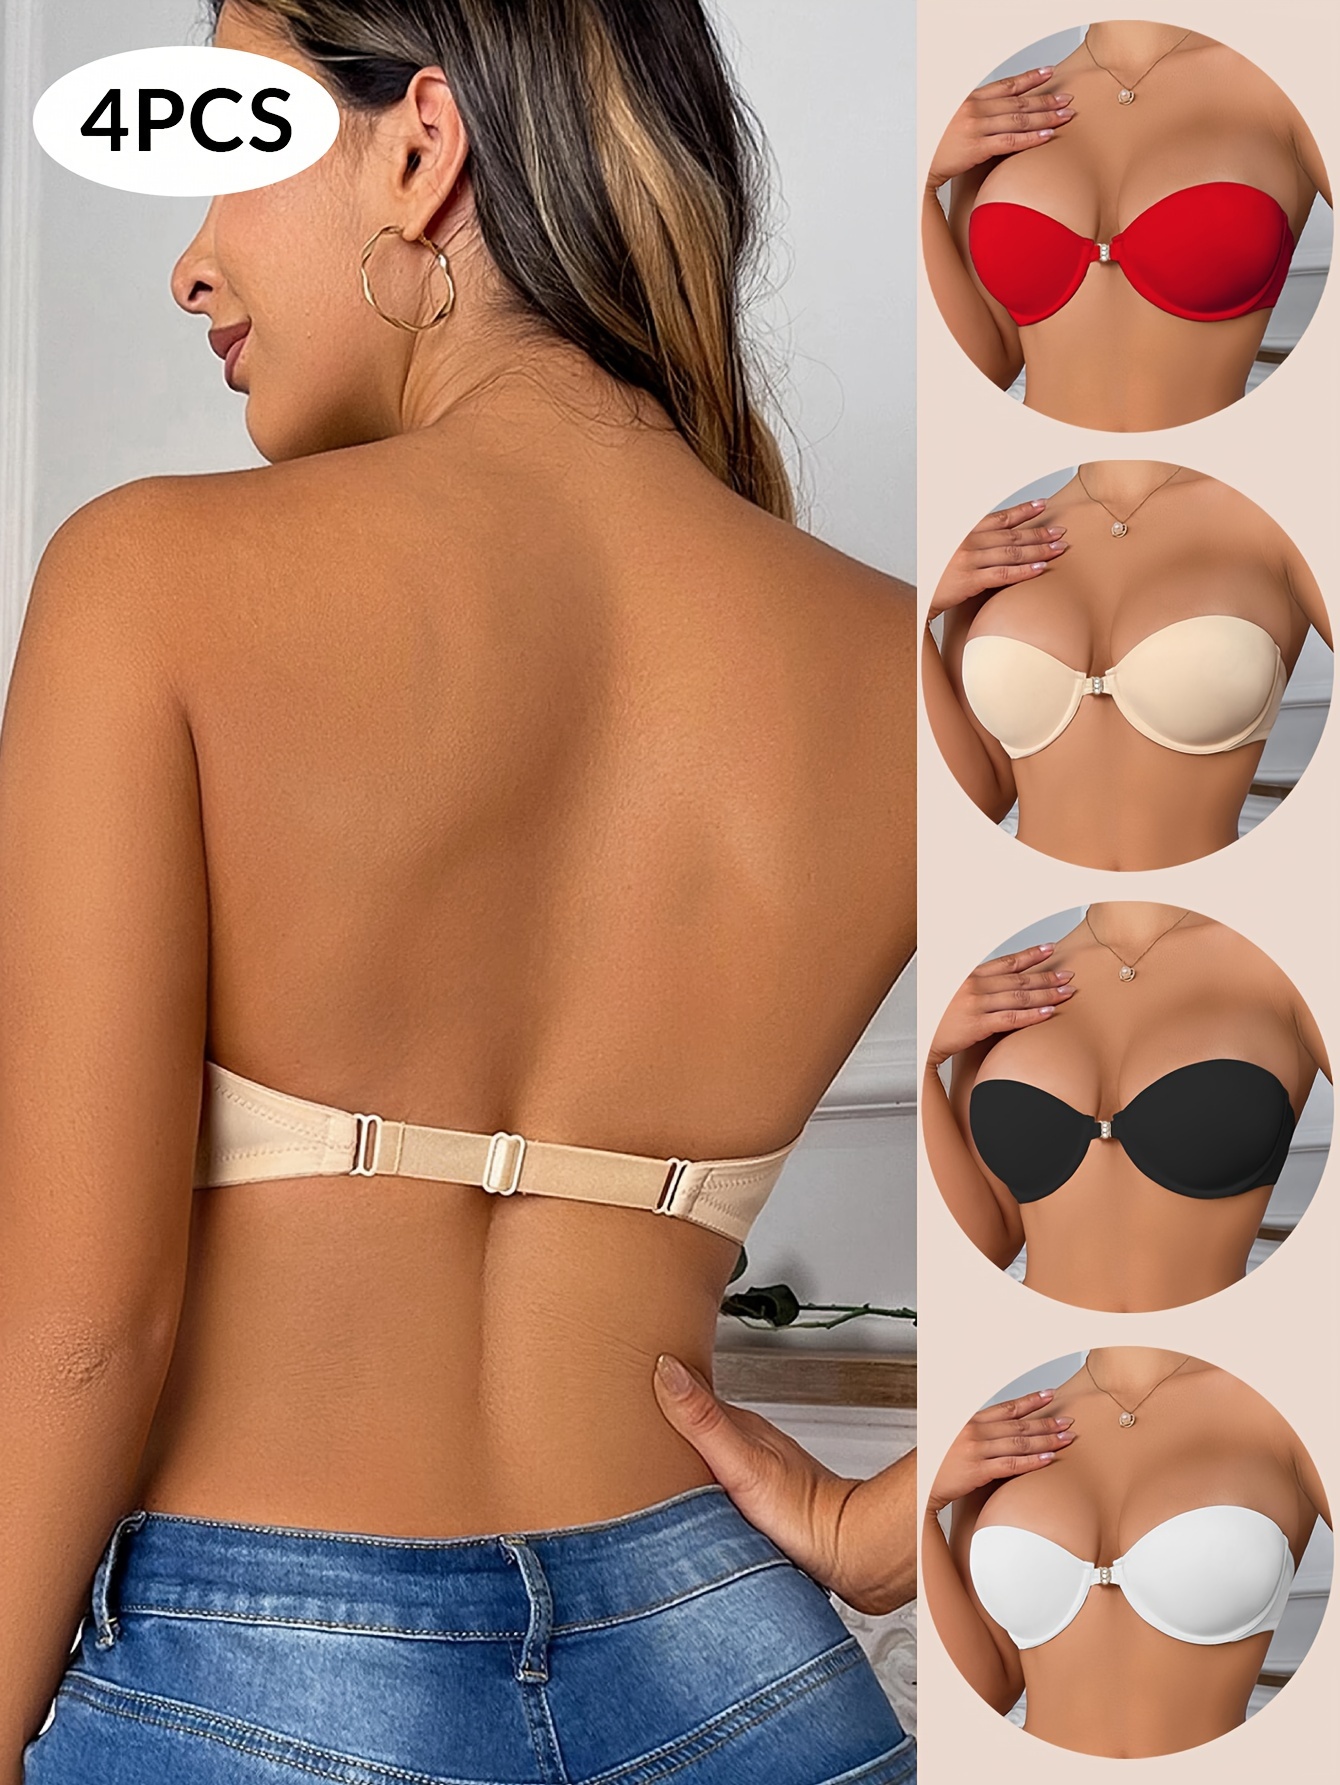 Women Seamless Strapless Bra High Elastic Wrapped Invisible Chest